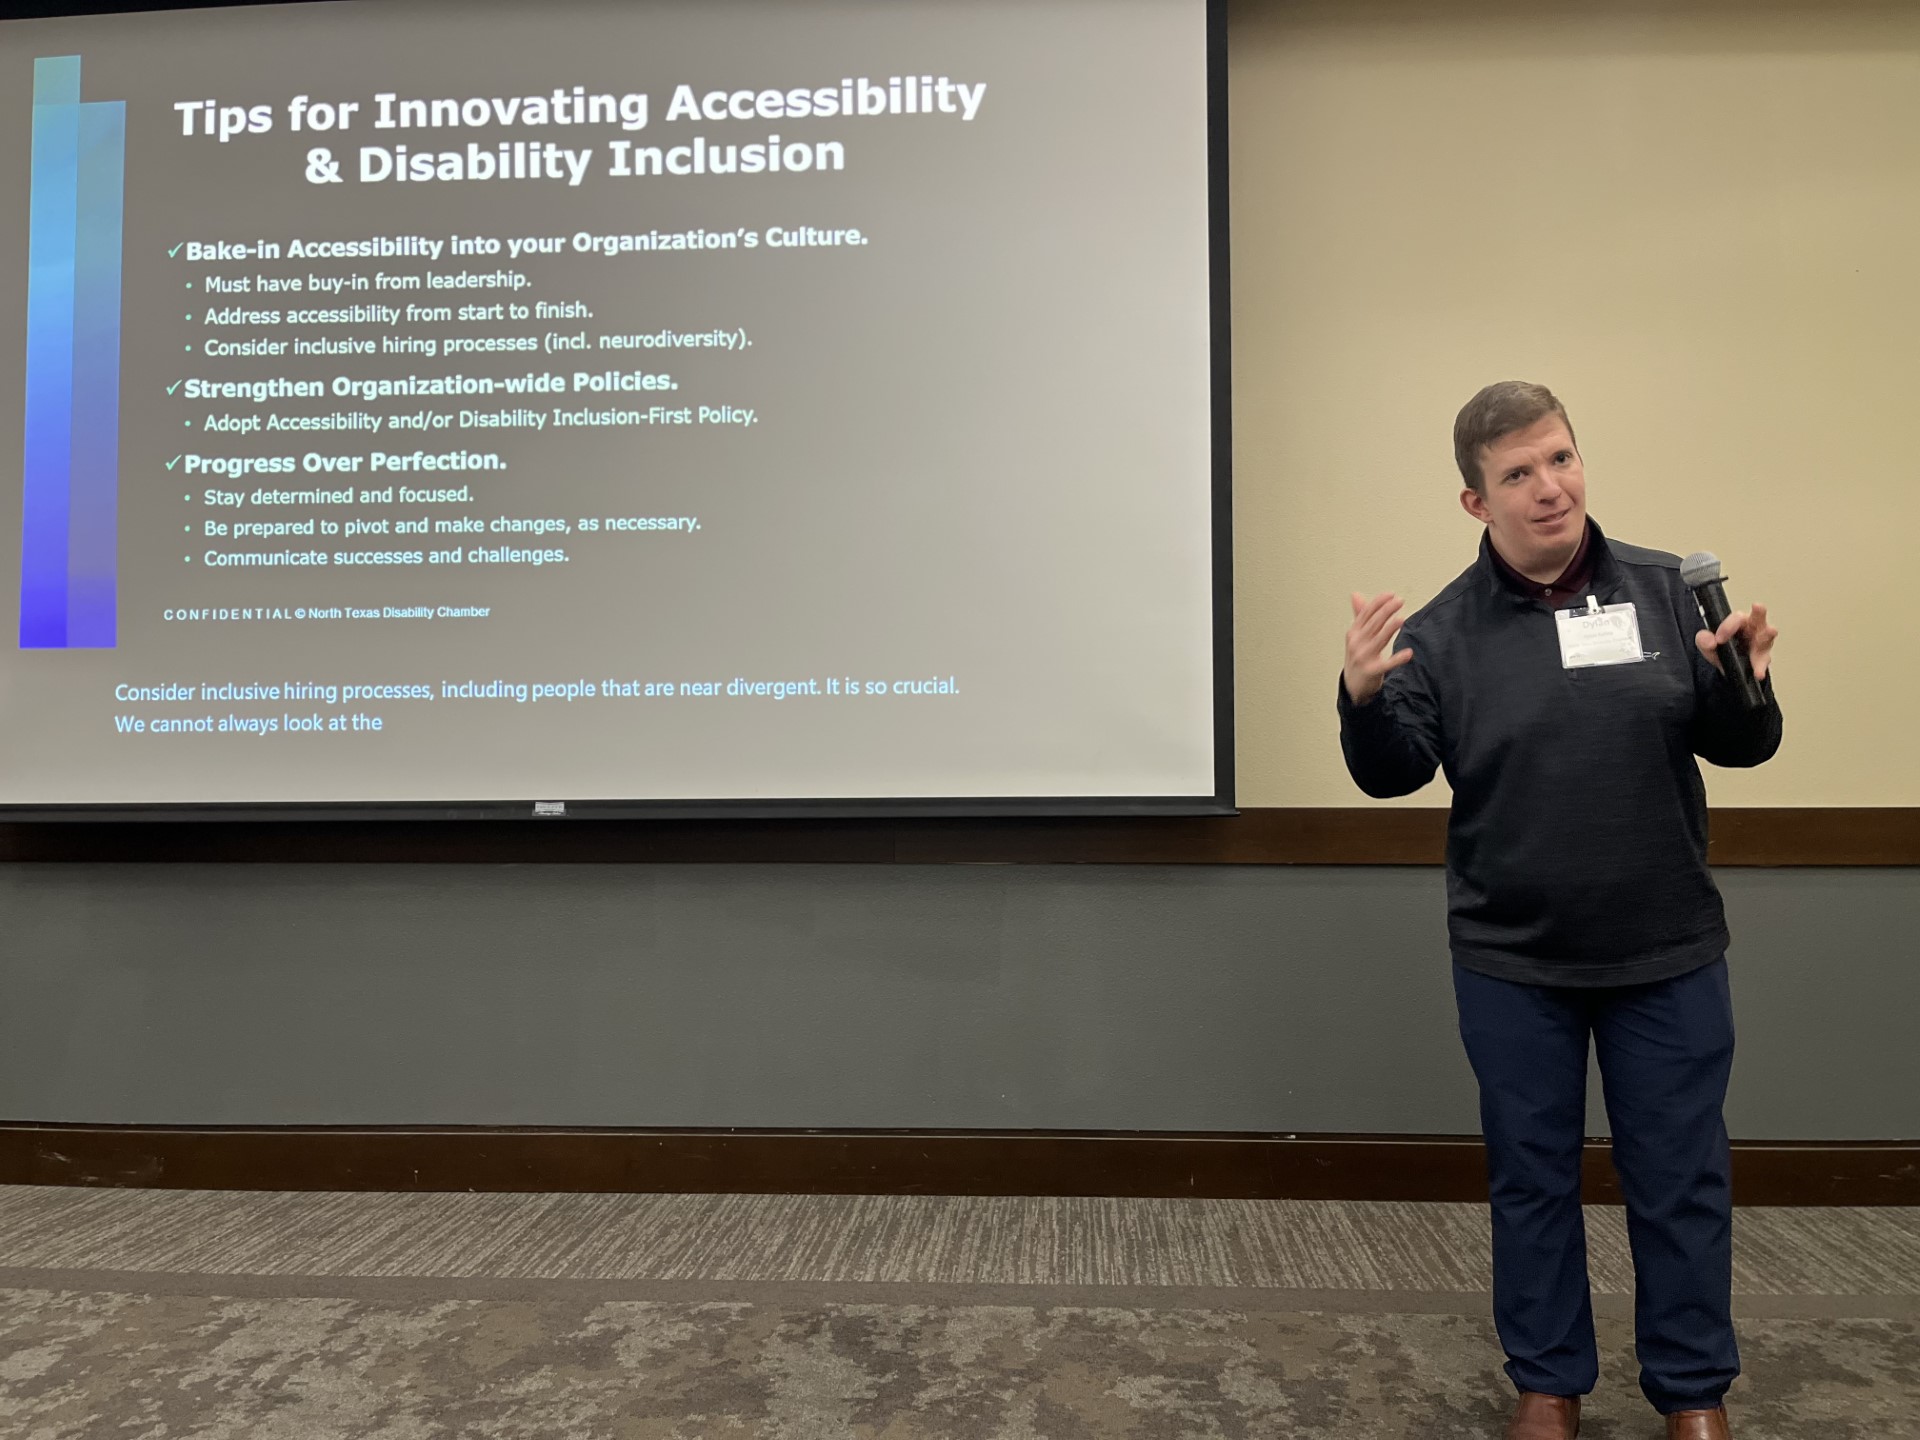 Dylan Rafaty speaking at the Inclusion Ignites Innovation Conference in Hurst, Texas